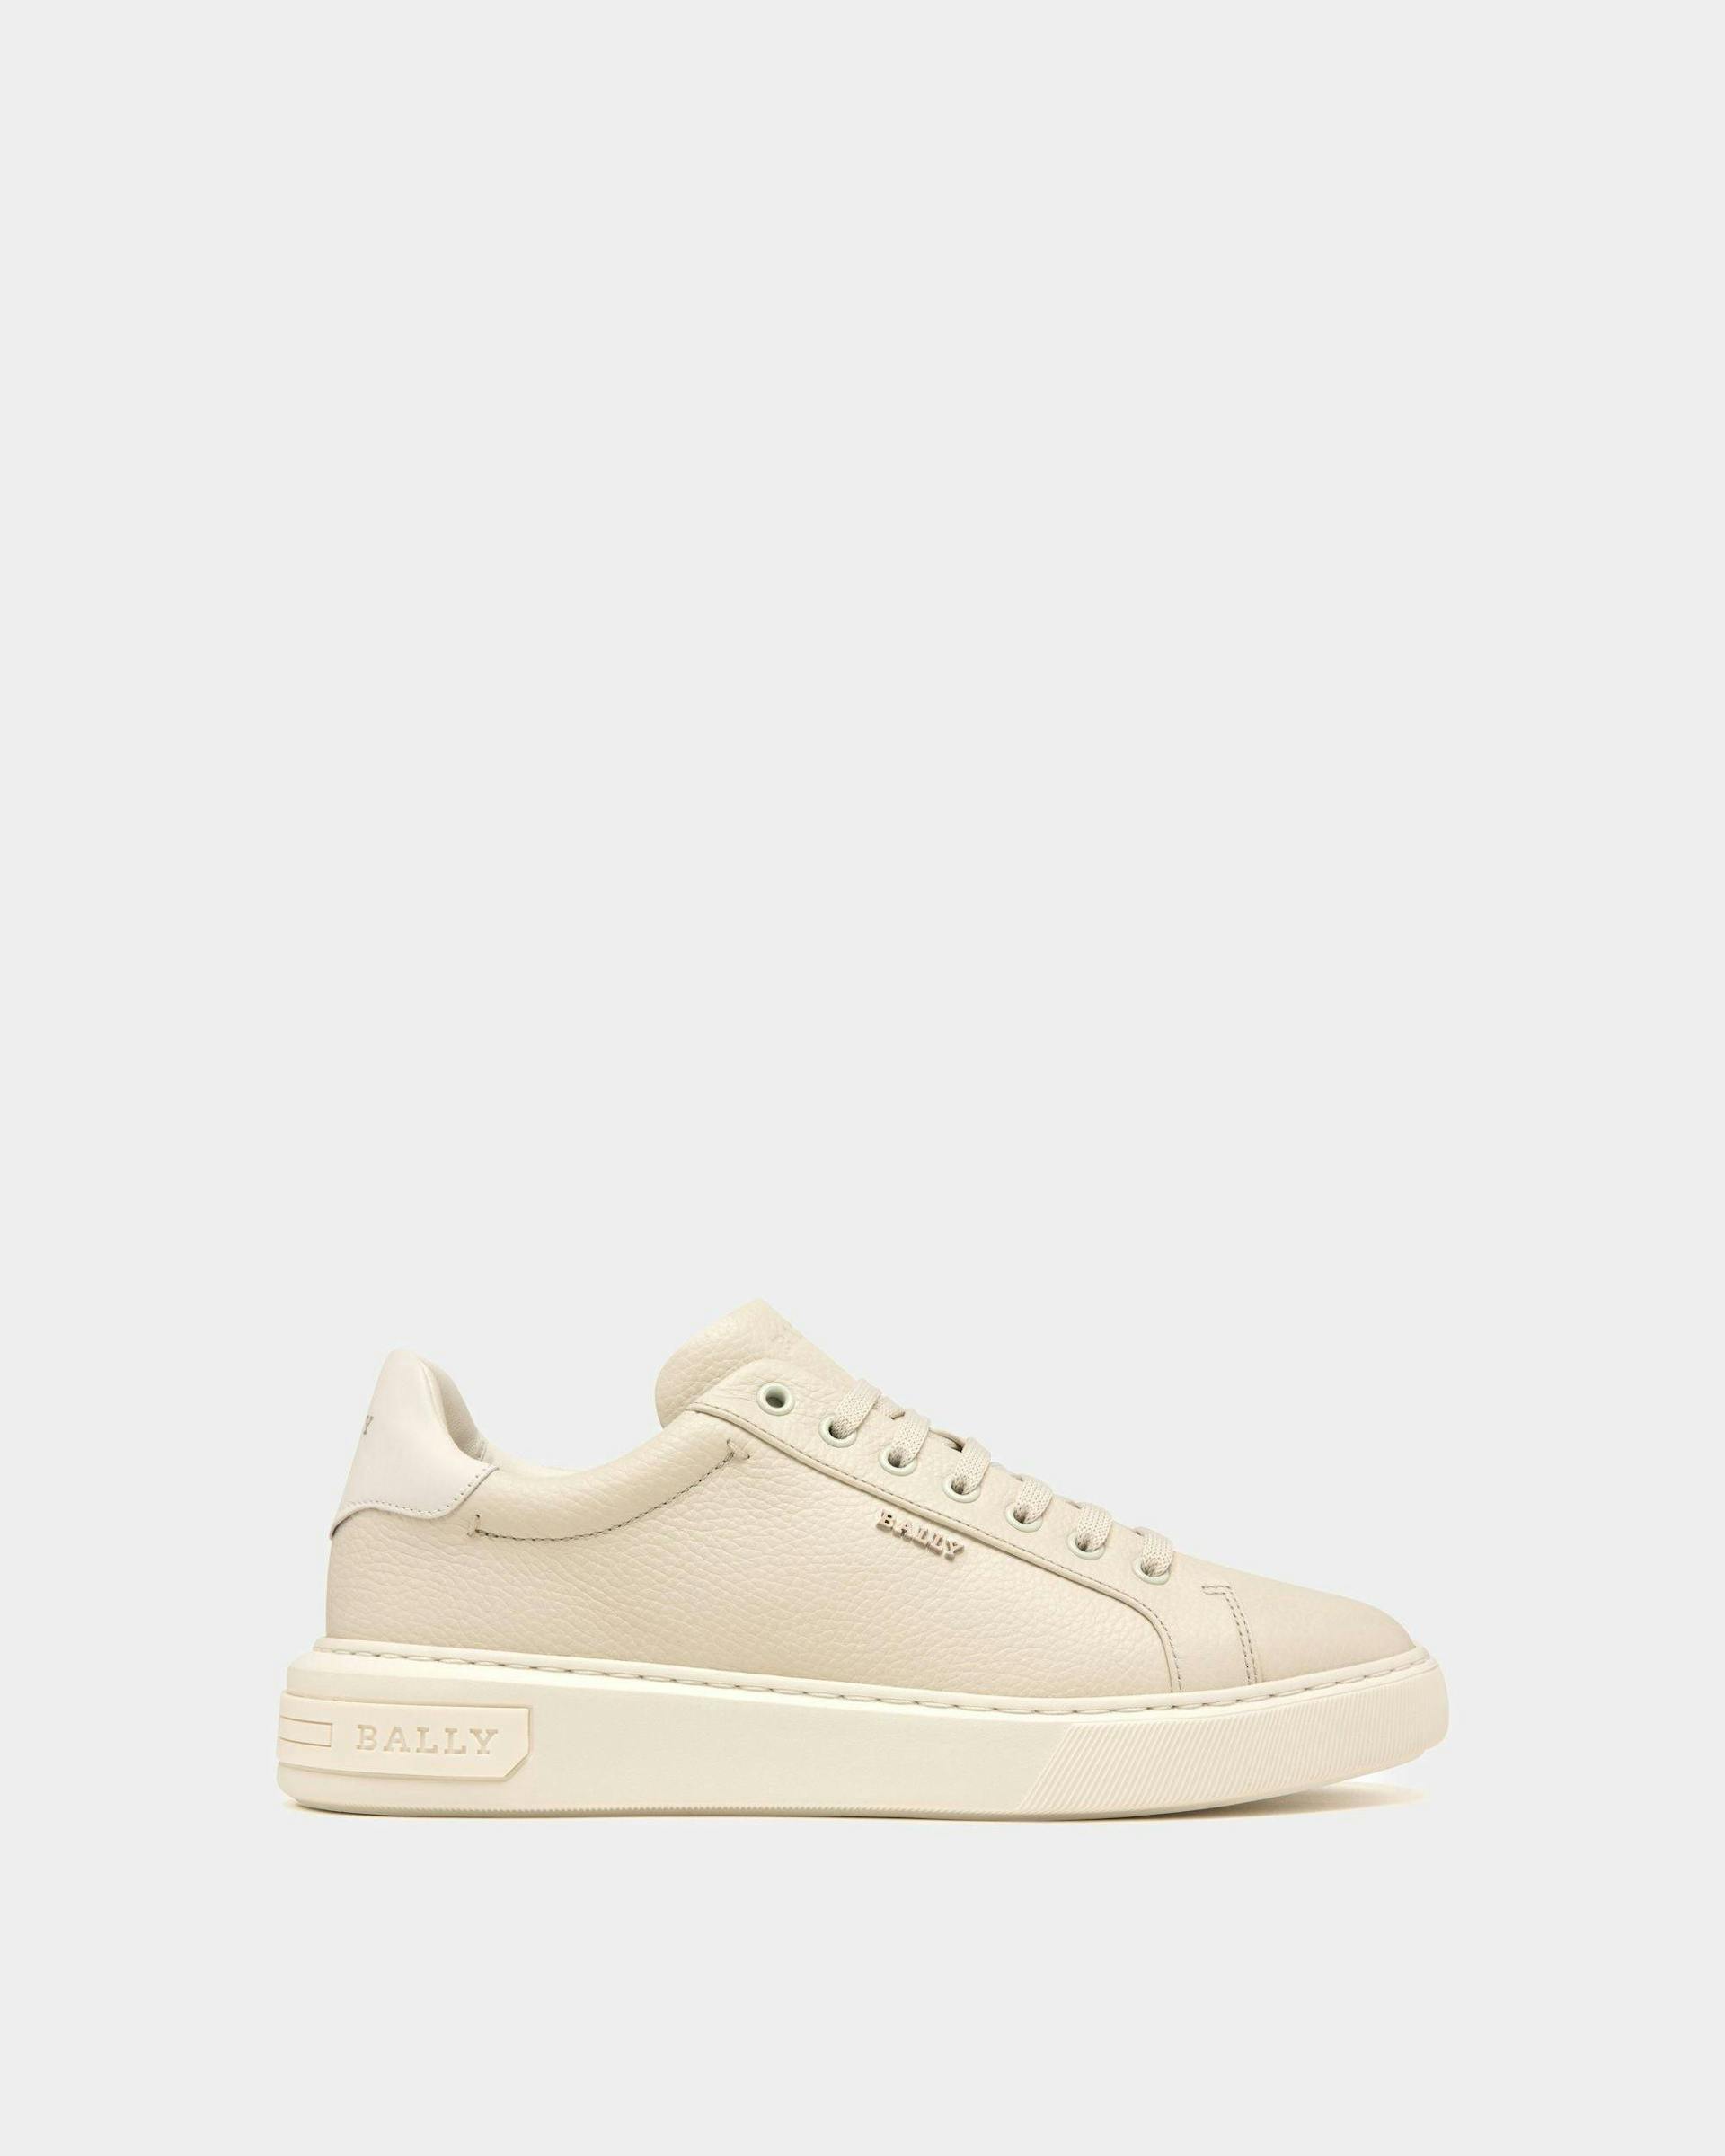 Miky Leather Sneakers In Denty White & White - Men's - Bally - 01